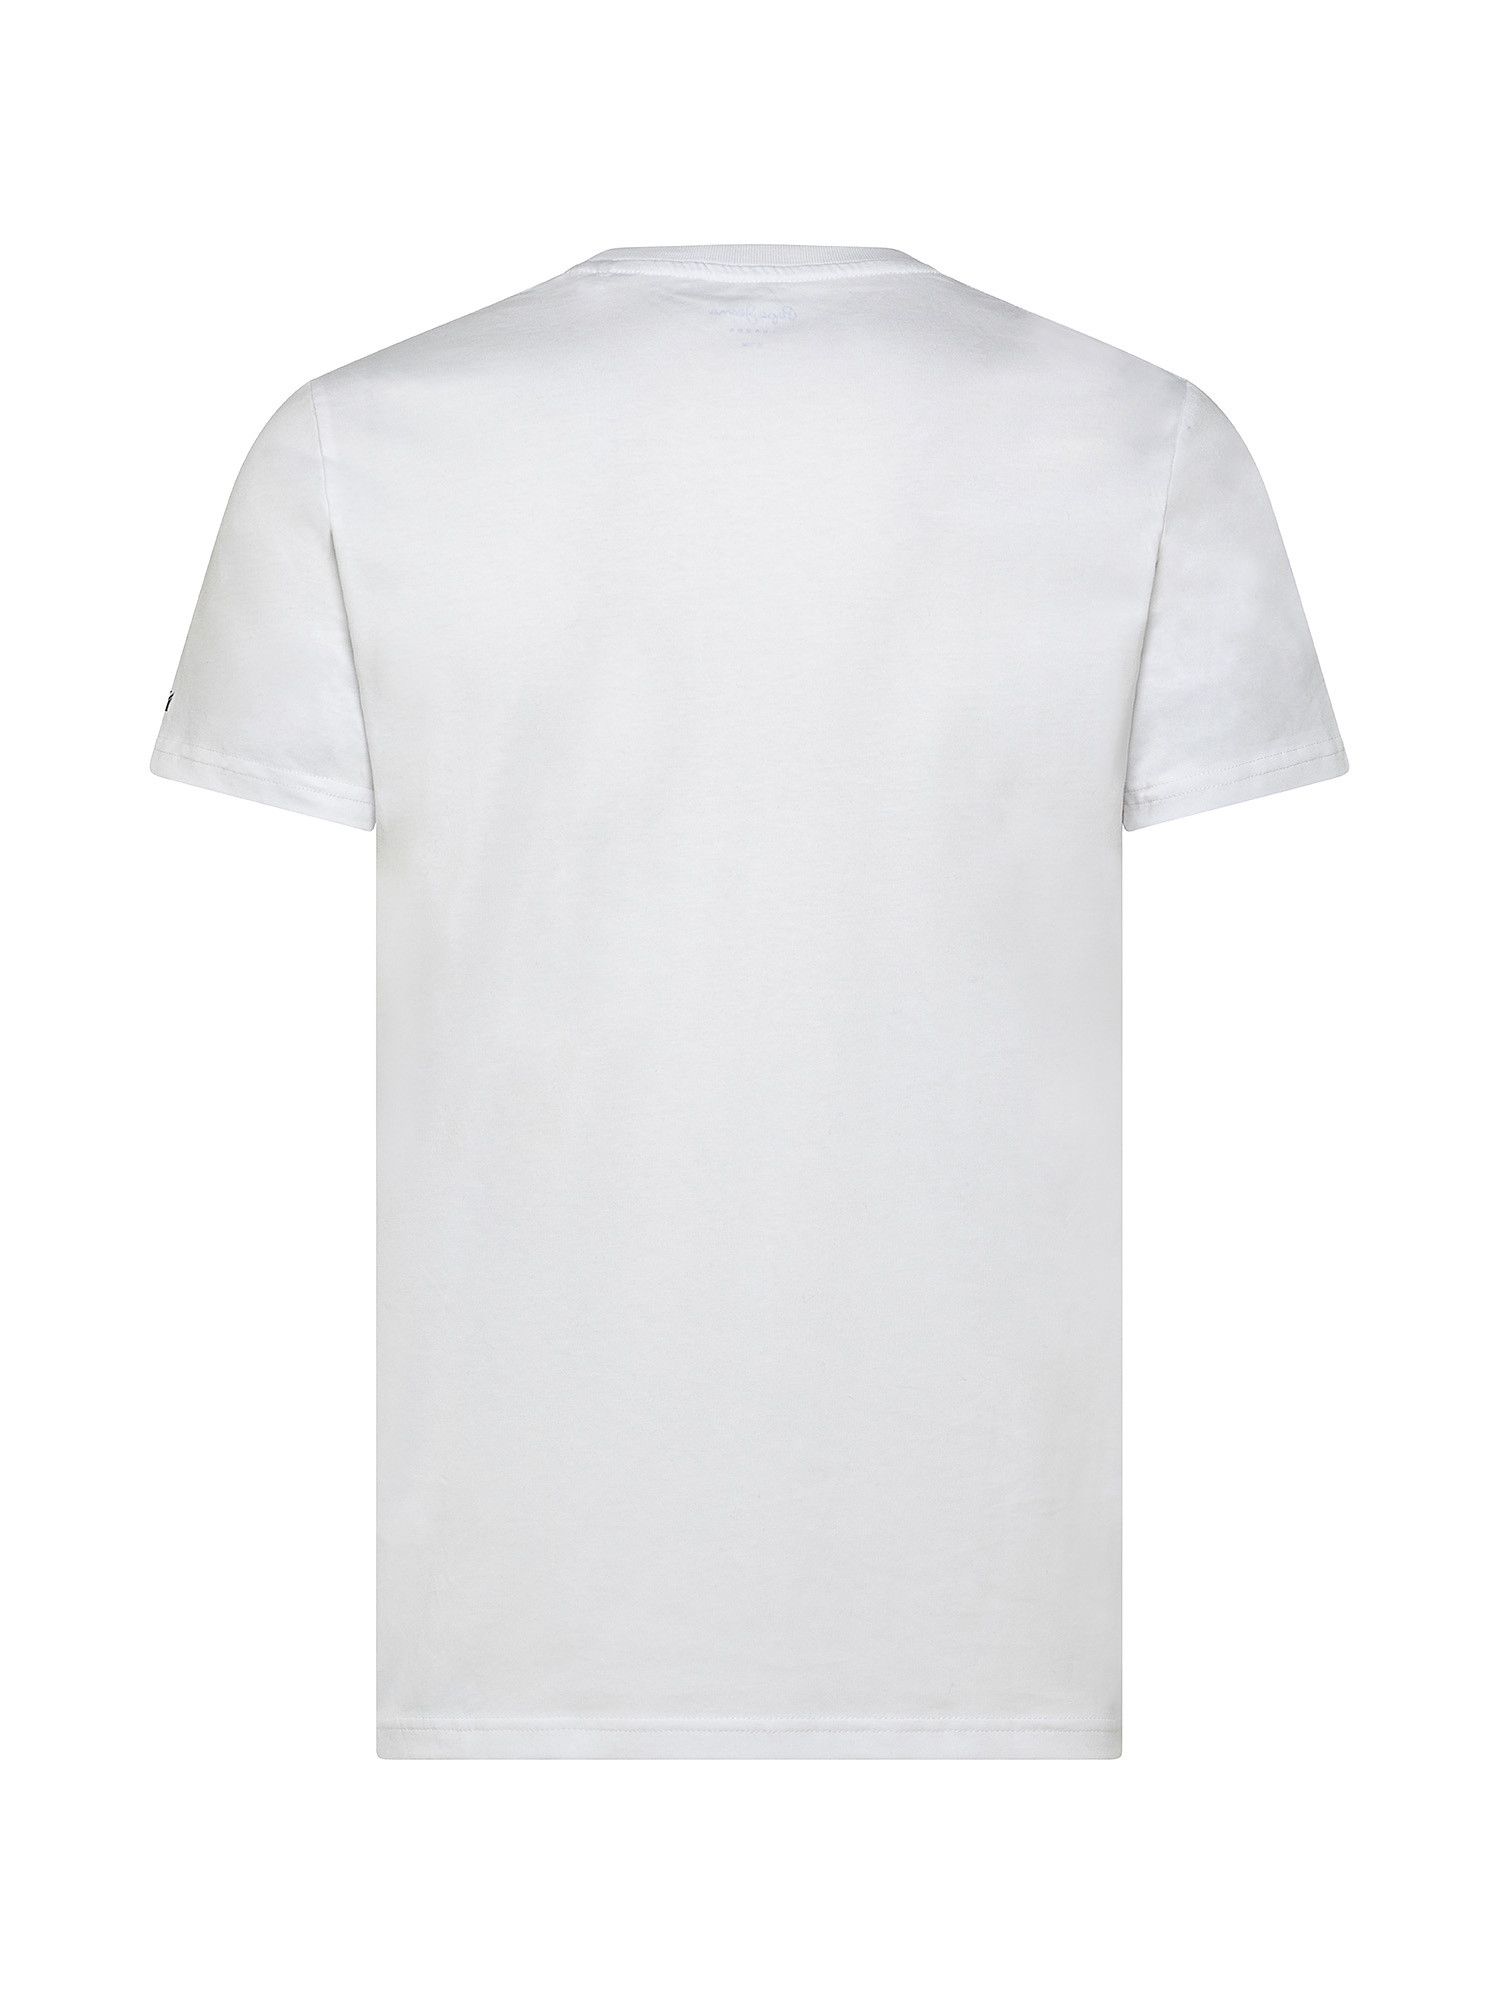 T-shirt in cotone santino, Bianco, large image number 1